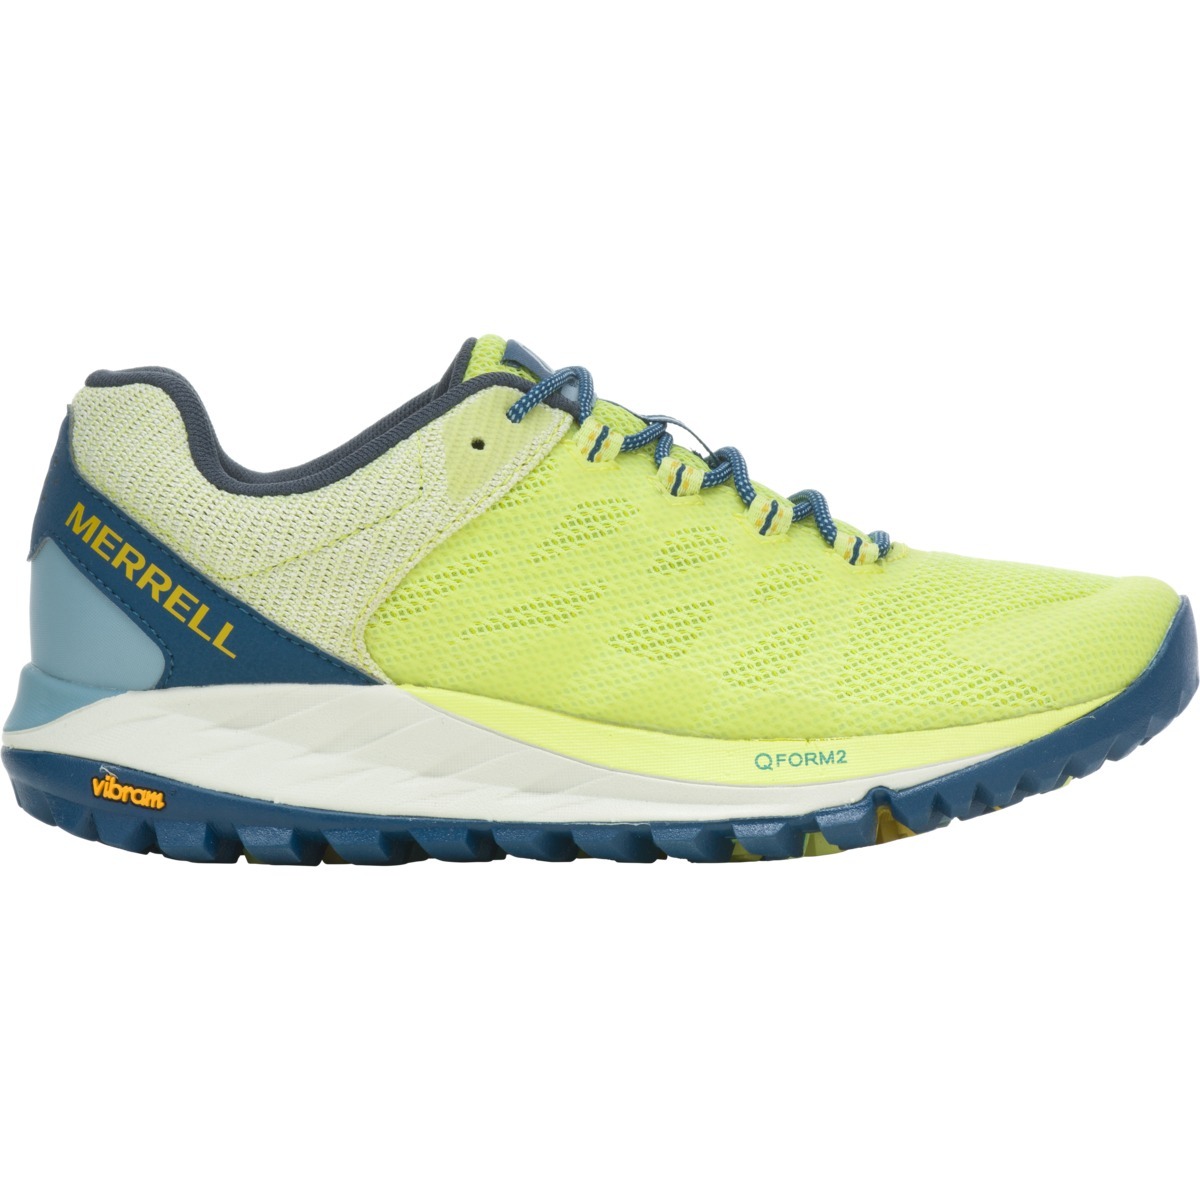 Mens, Women, and Kids Merrell Nova 2 & Antora 2 Sneakers from $22-$120 + Free Shipping on Orders $49+